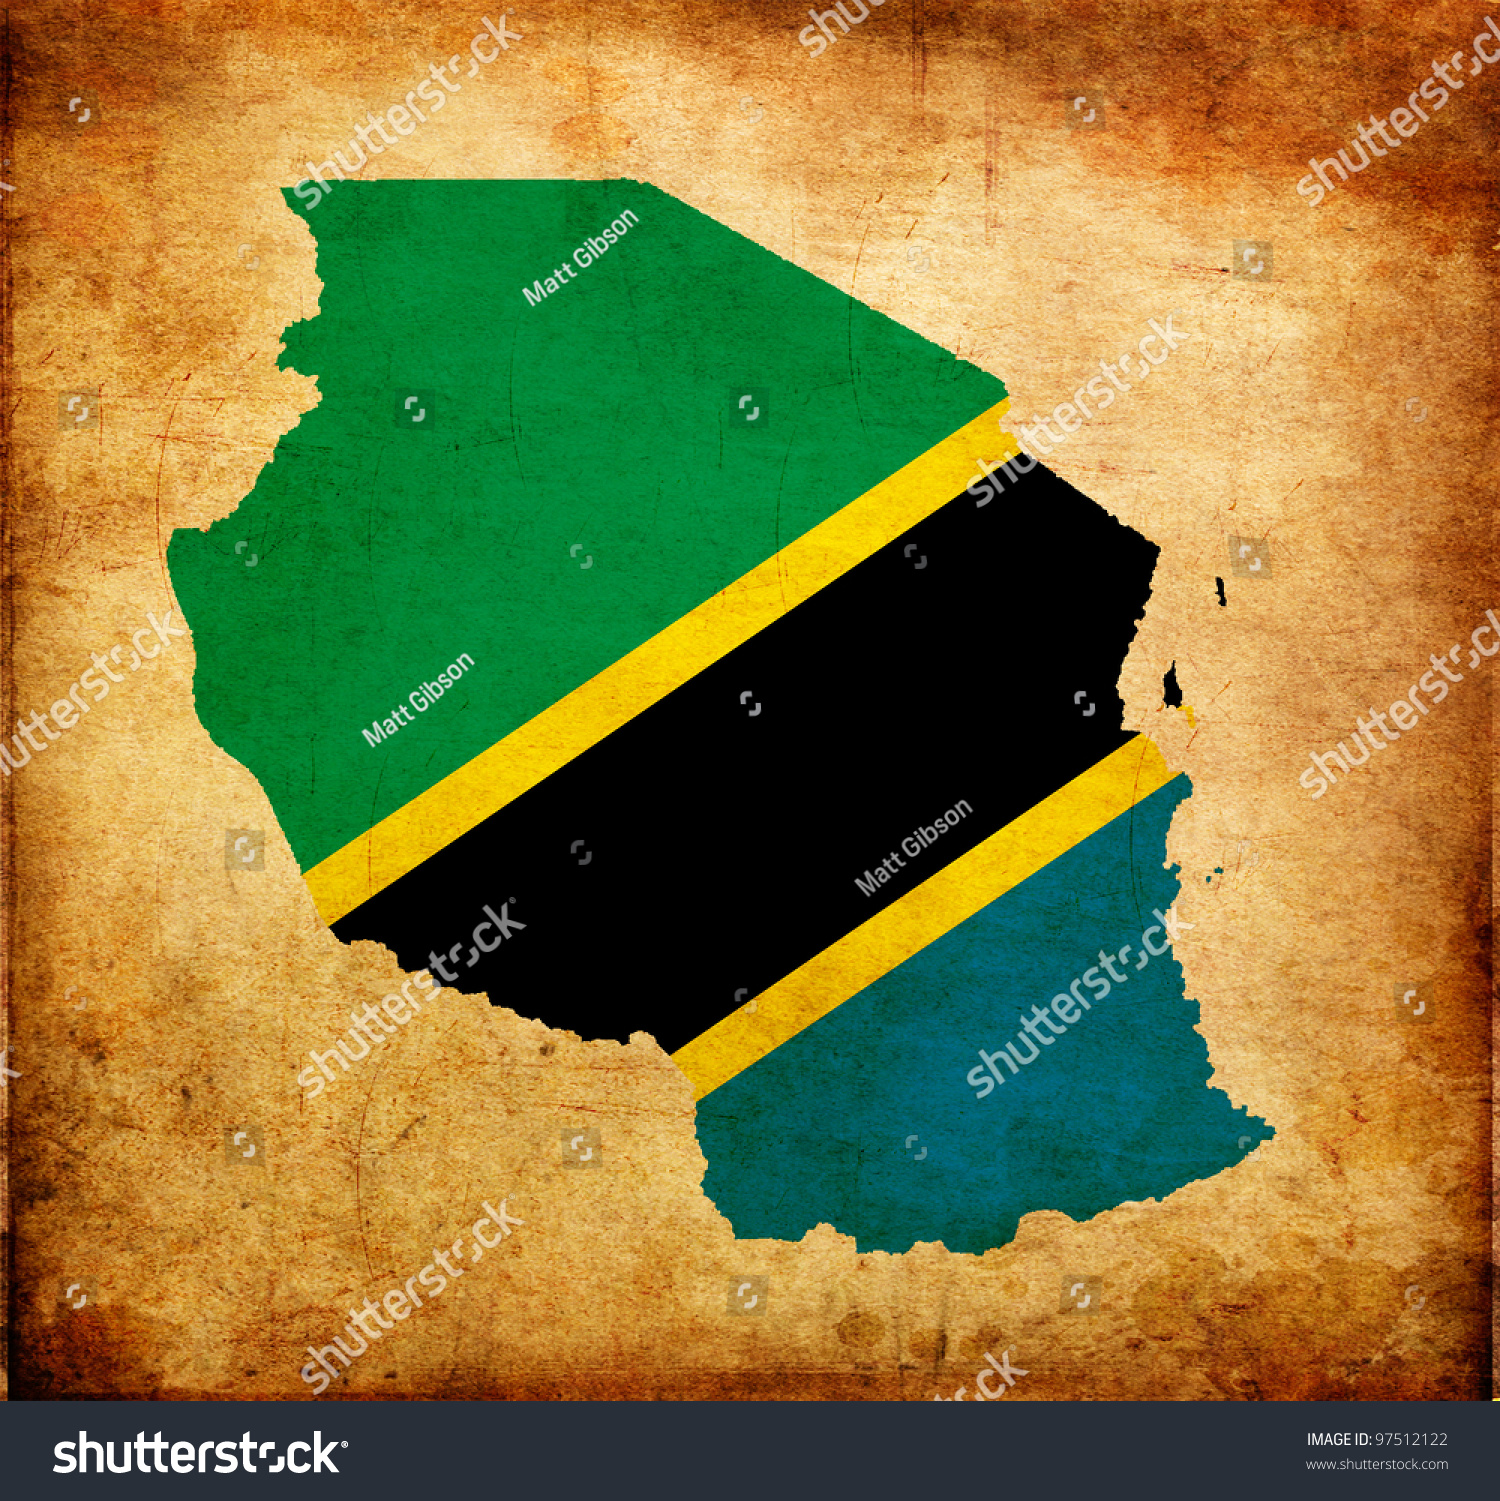 Outline Map Tanzania Flag Grunge Paper Stock Illustration 97512122 ...